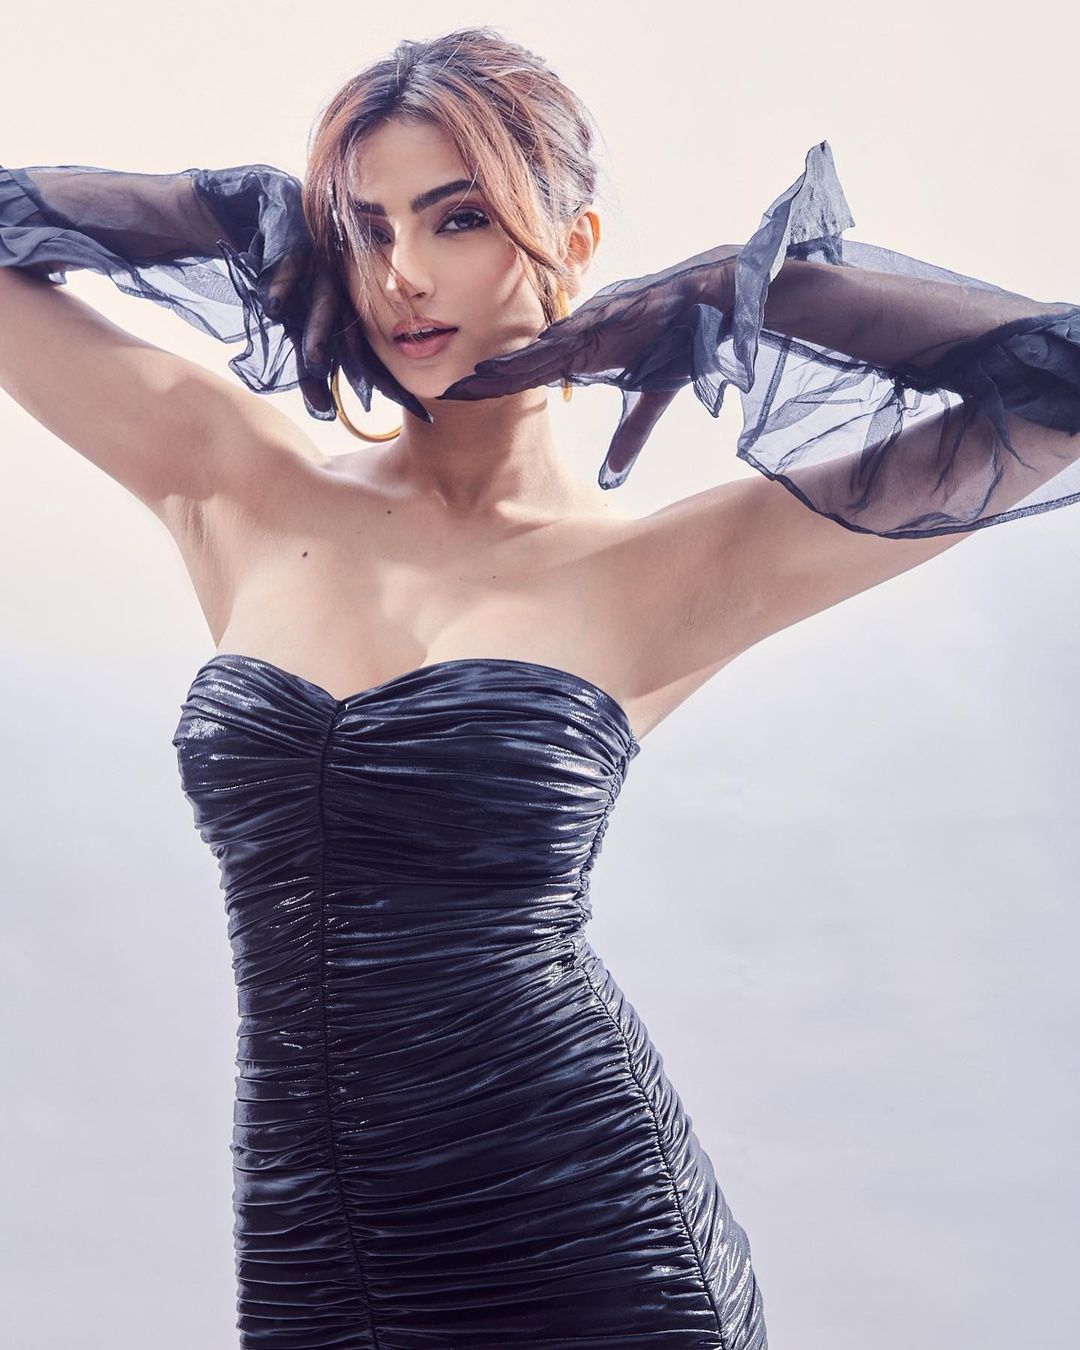 From Shilpa Shetty to Palak Tiwari: These actresses set the internet on fire with their strapless ruched bodycon dresses, see photos 5606